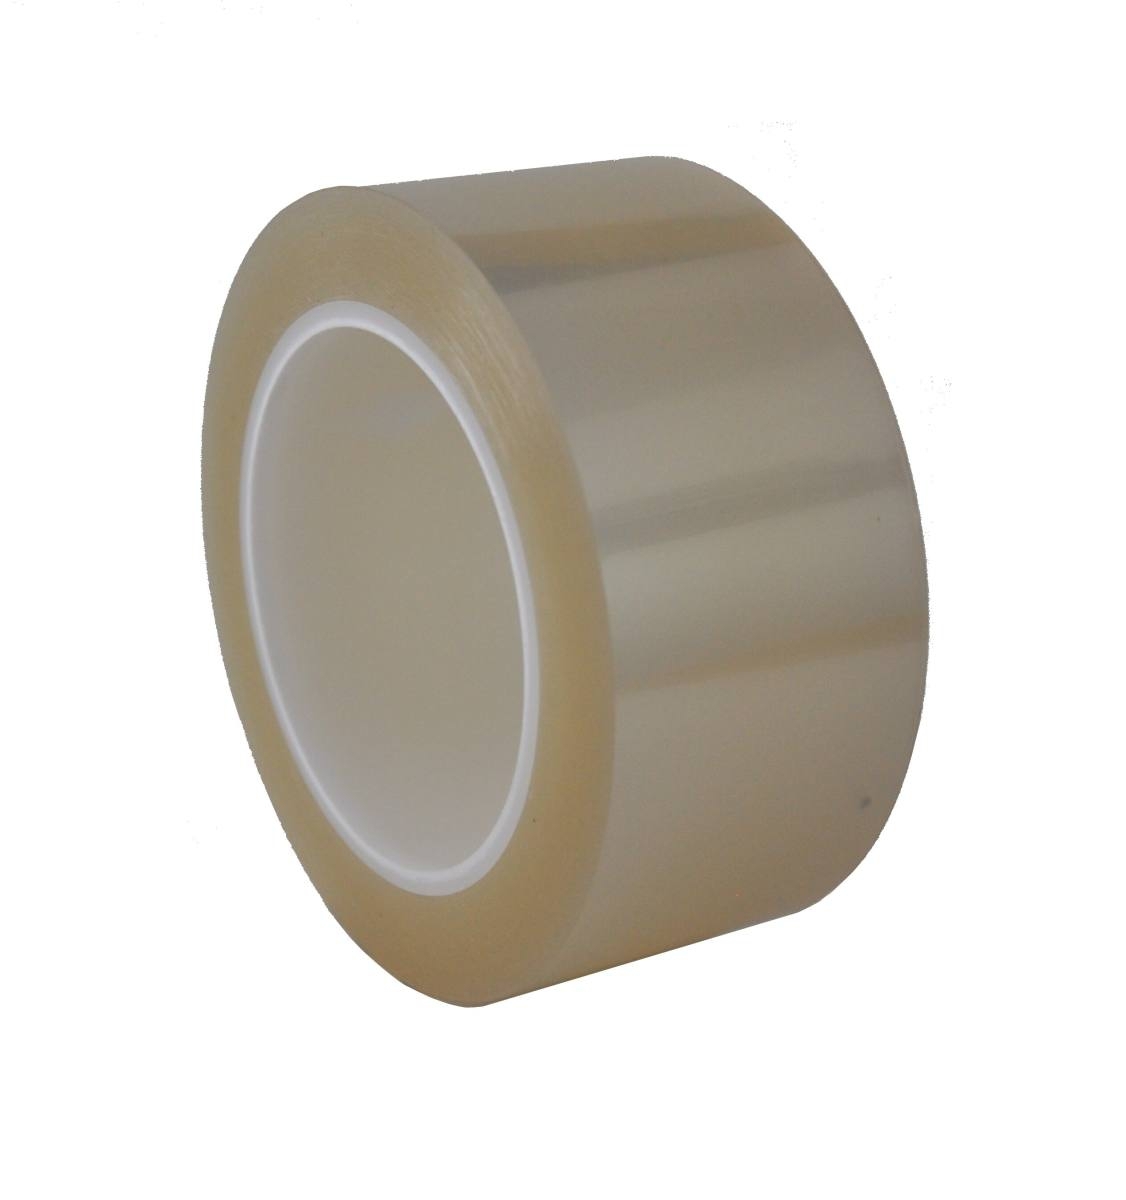 SKS fluorosilicone film, polyester film 0.075mm, 1040mmx100m, coated on one side with fluorosilicone, transparent